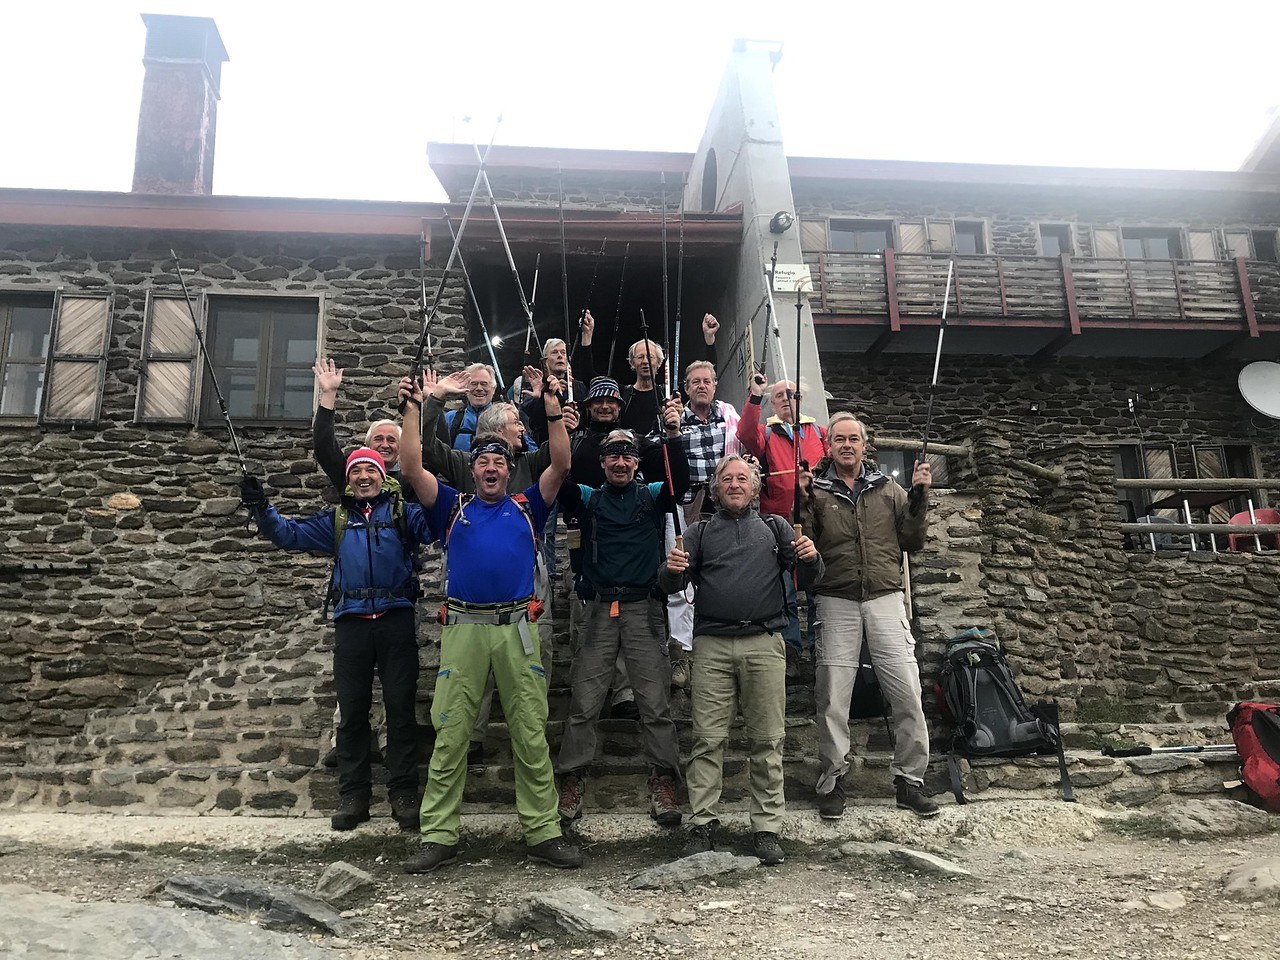 3 day Mulhacen (Tony Scheer Group) 13th - 15th October 2018